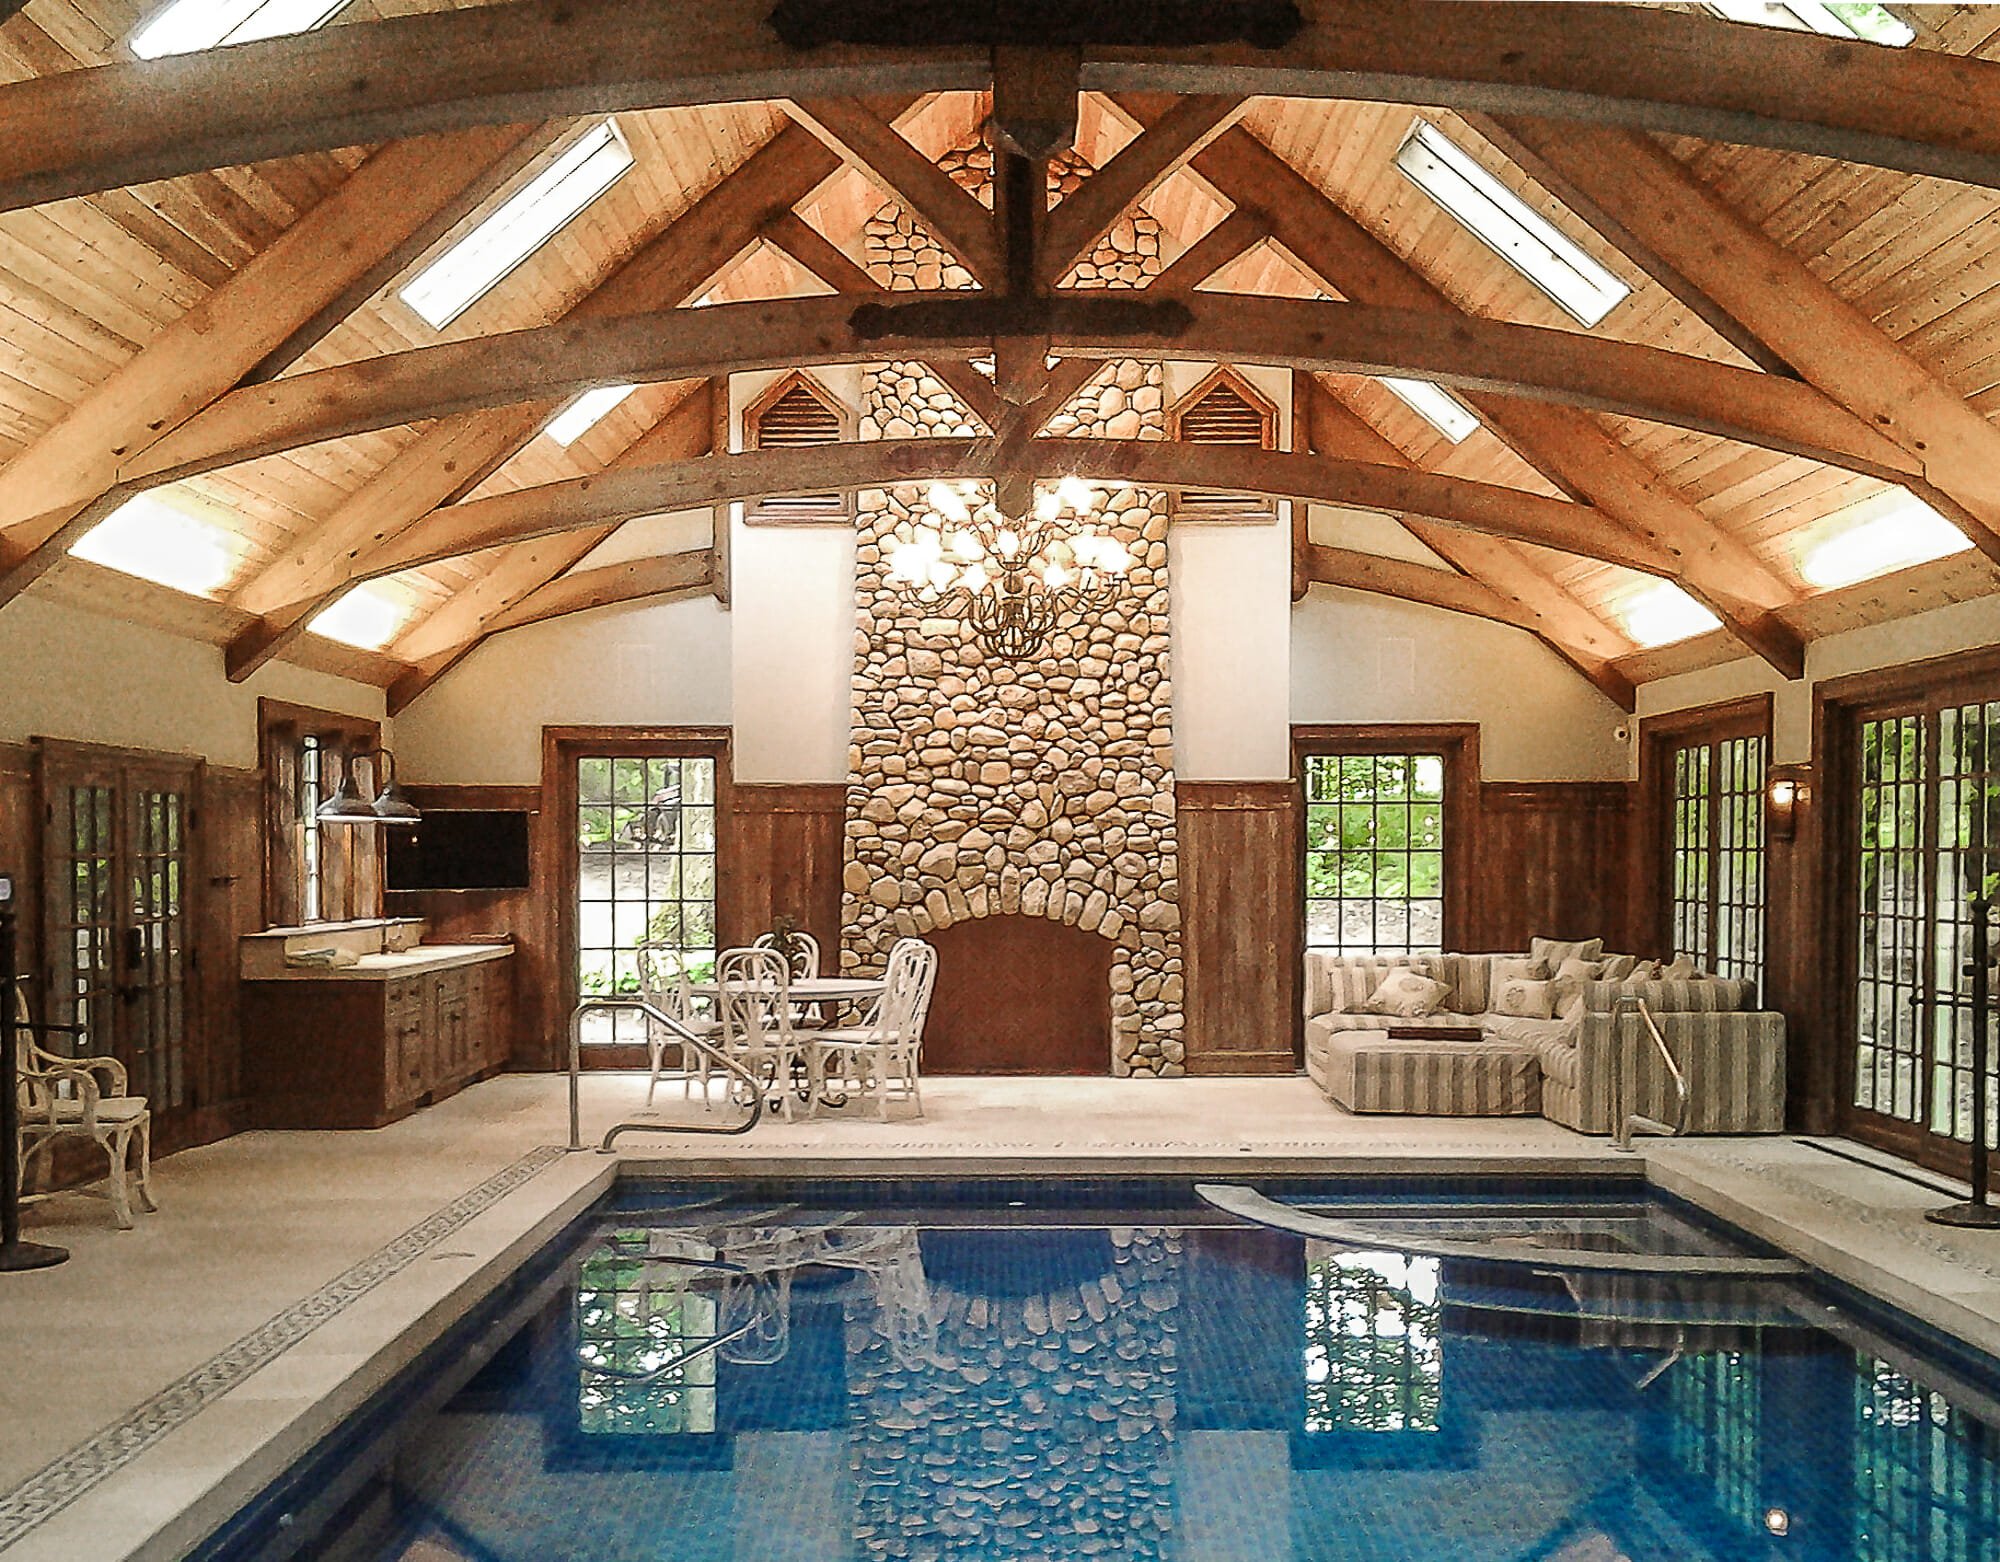 Timber Frame Arched Trusses Indoor Pool House in OH. Reed Pool House.